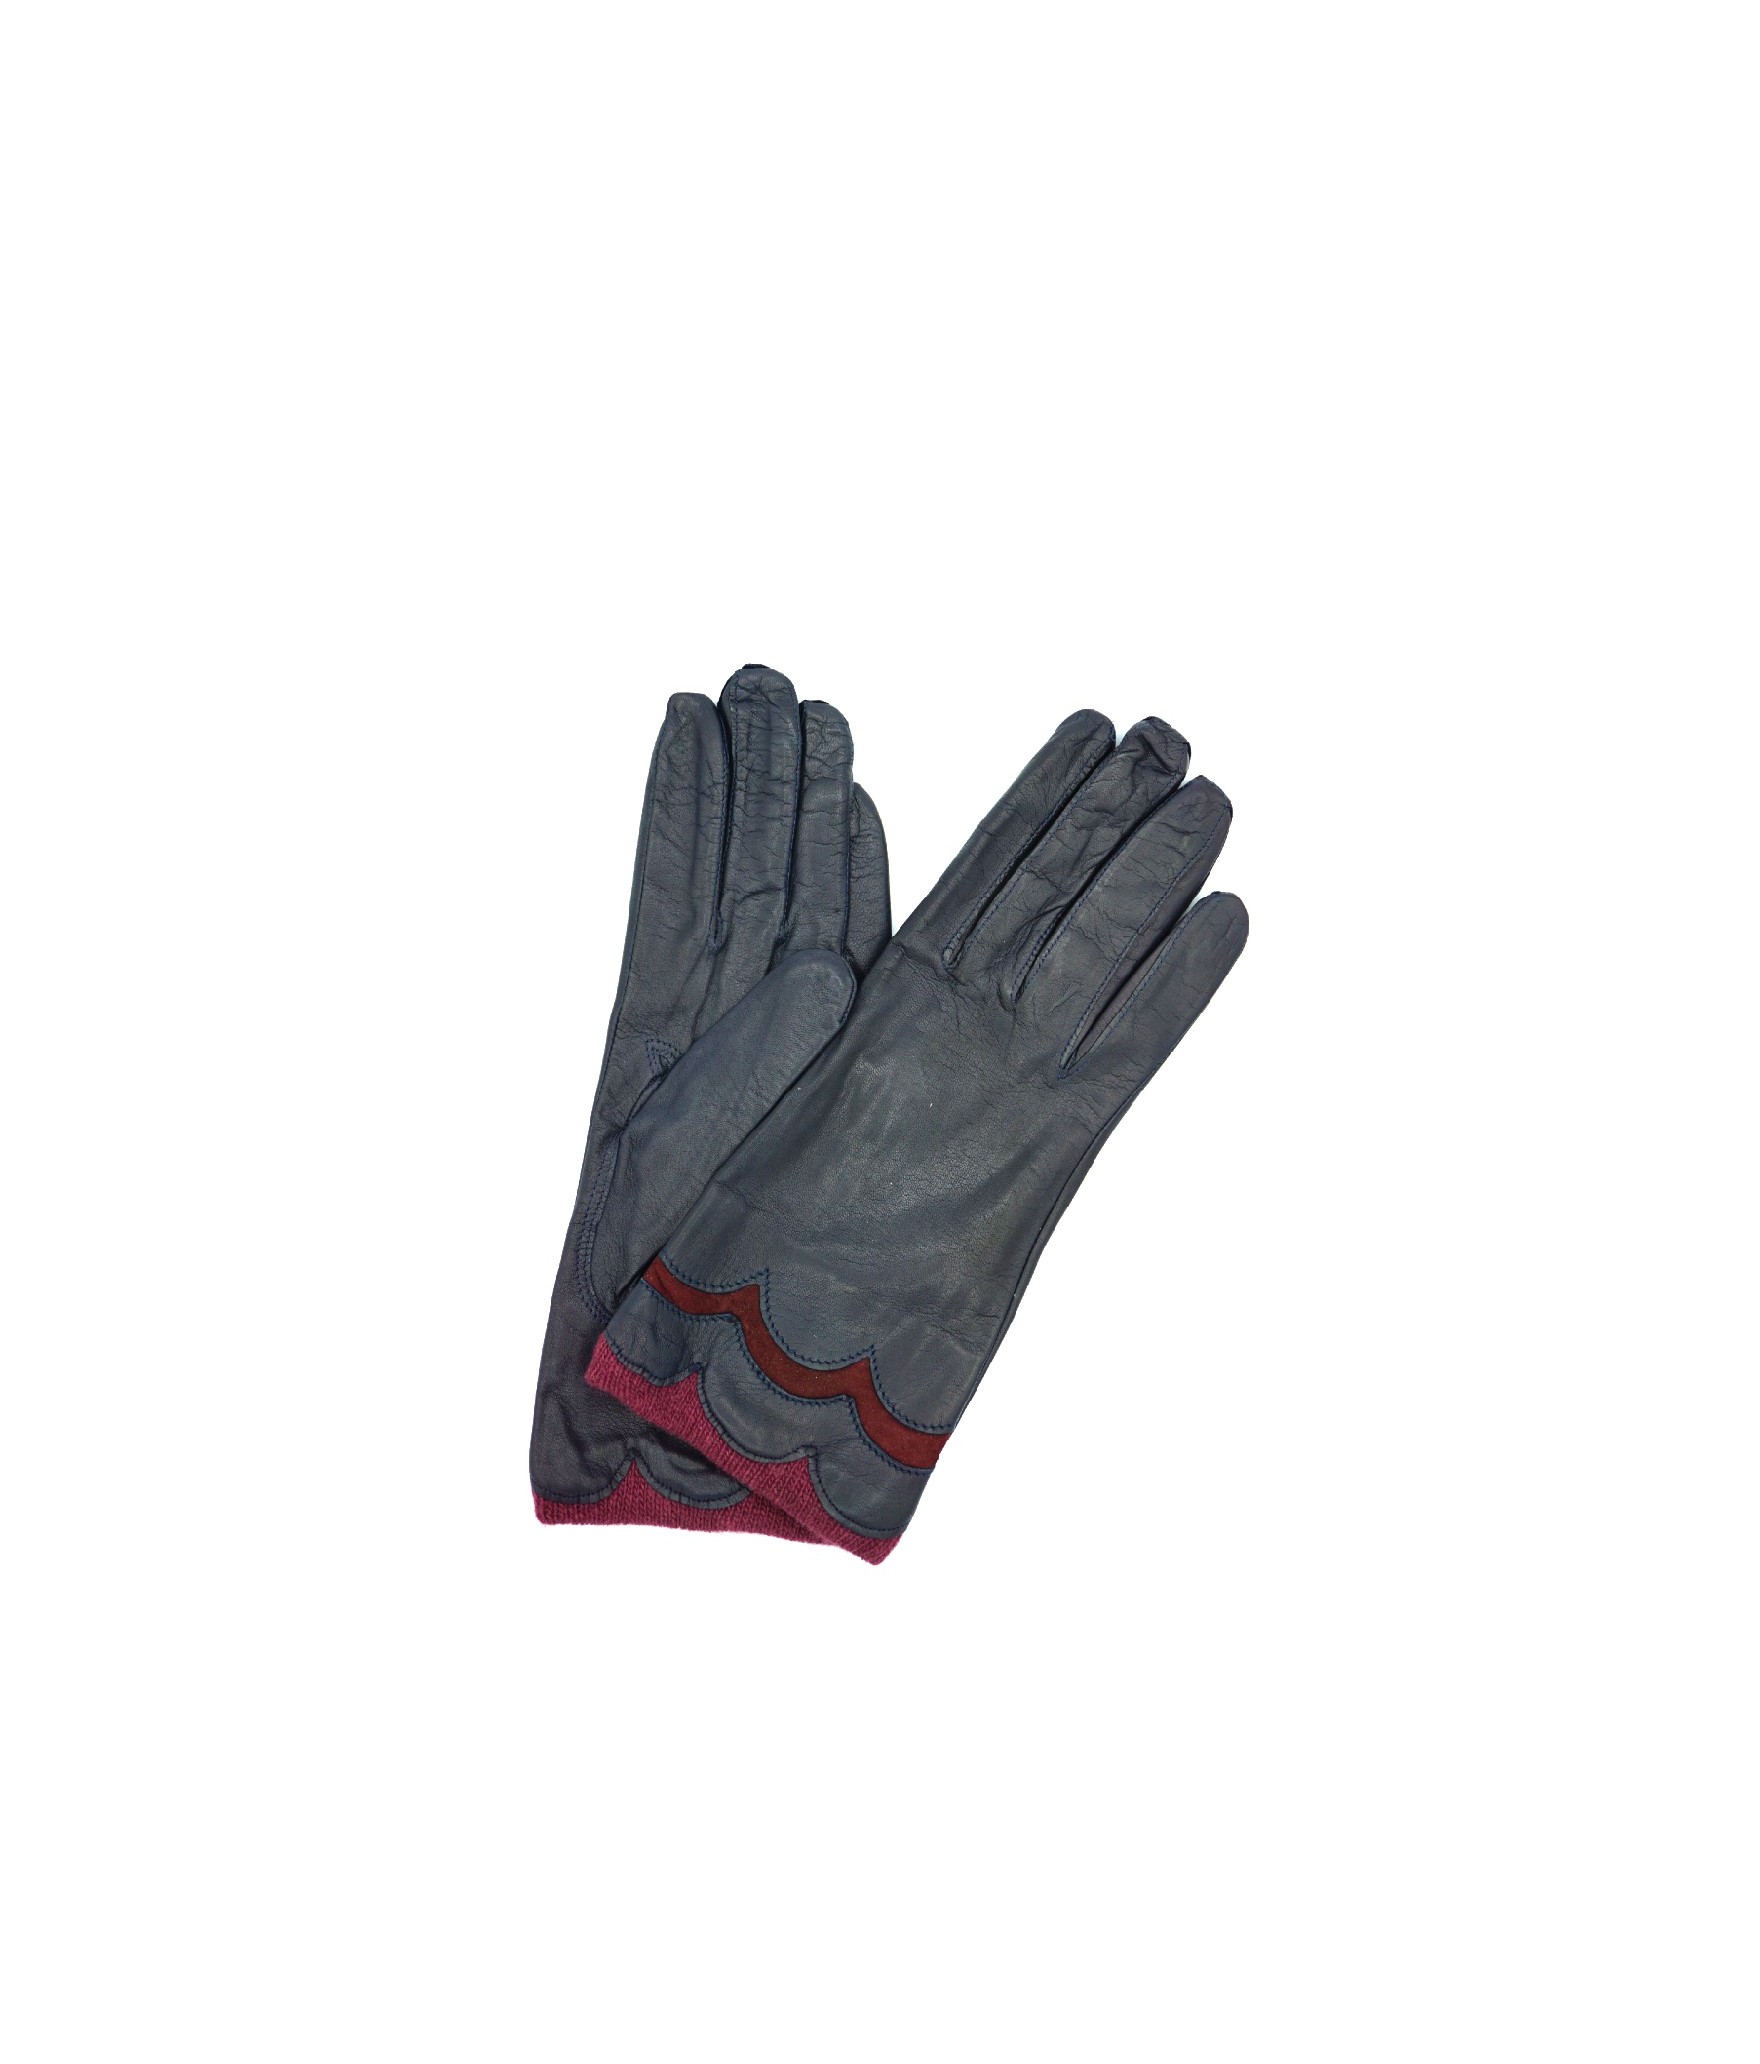 1756 Leather Gloves Cashmere Lined Navy-Bordeaux 